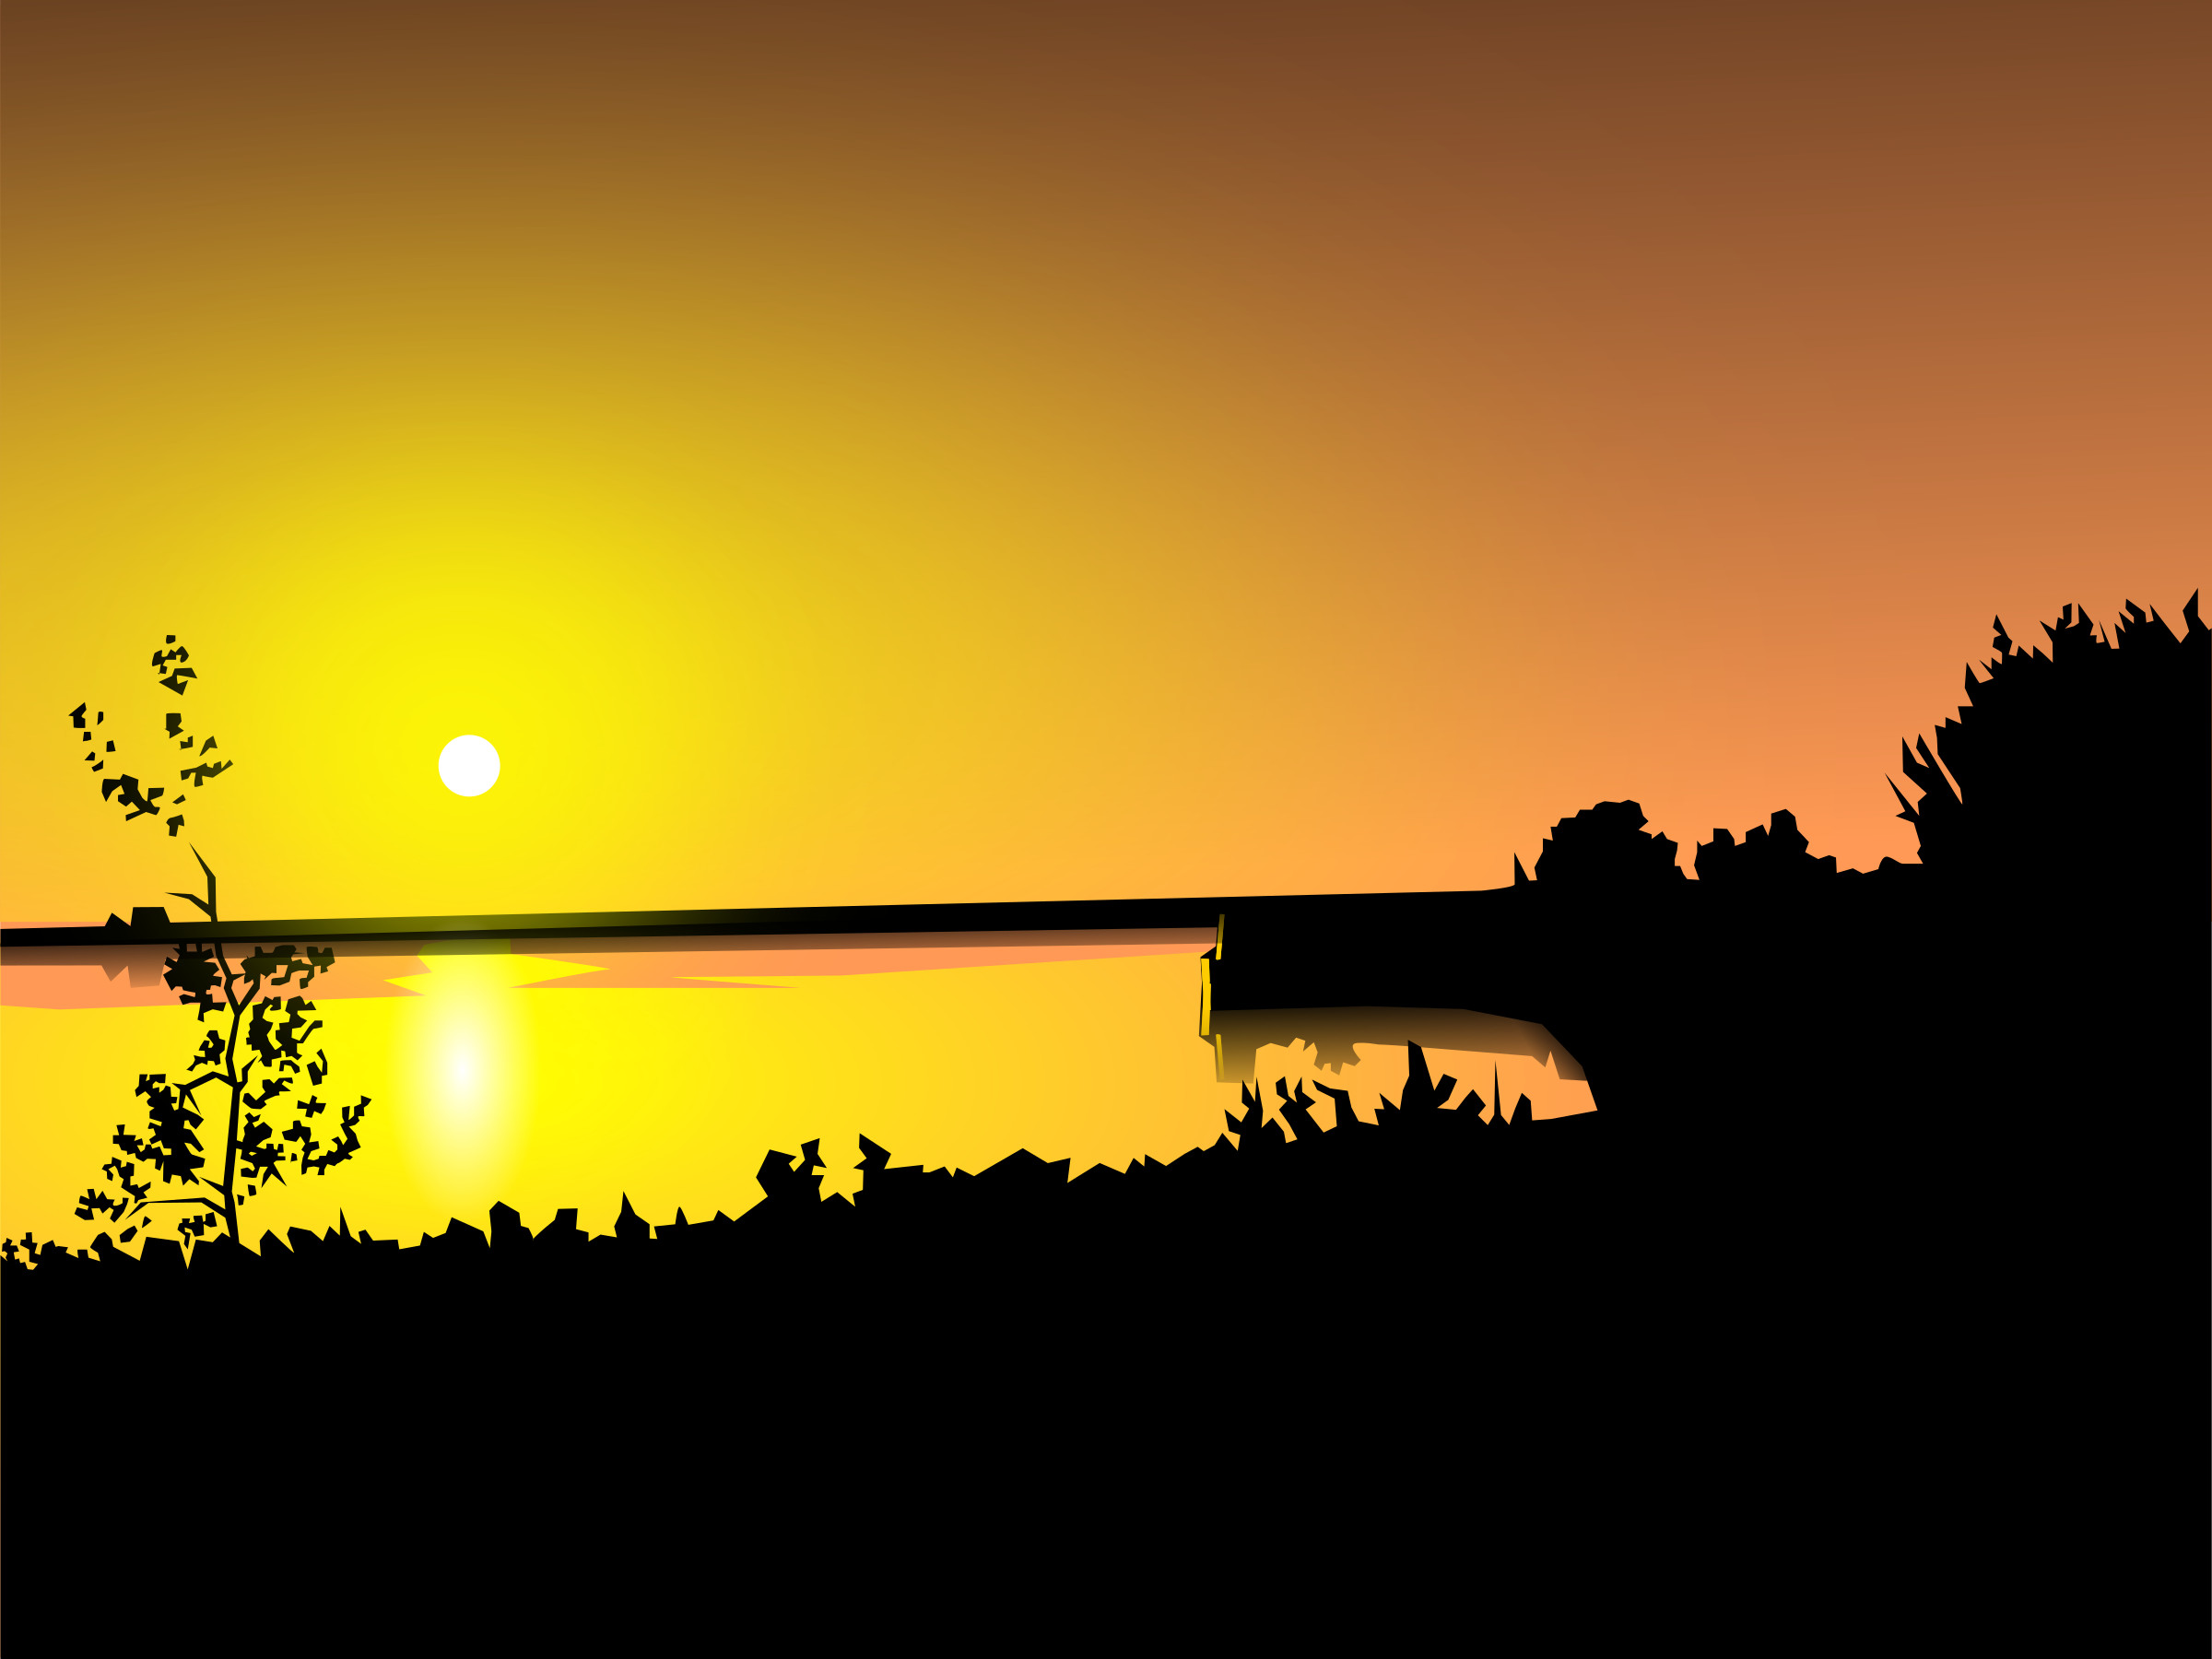 2400x1800 pin Sunset clipart sunset background #5